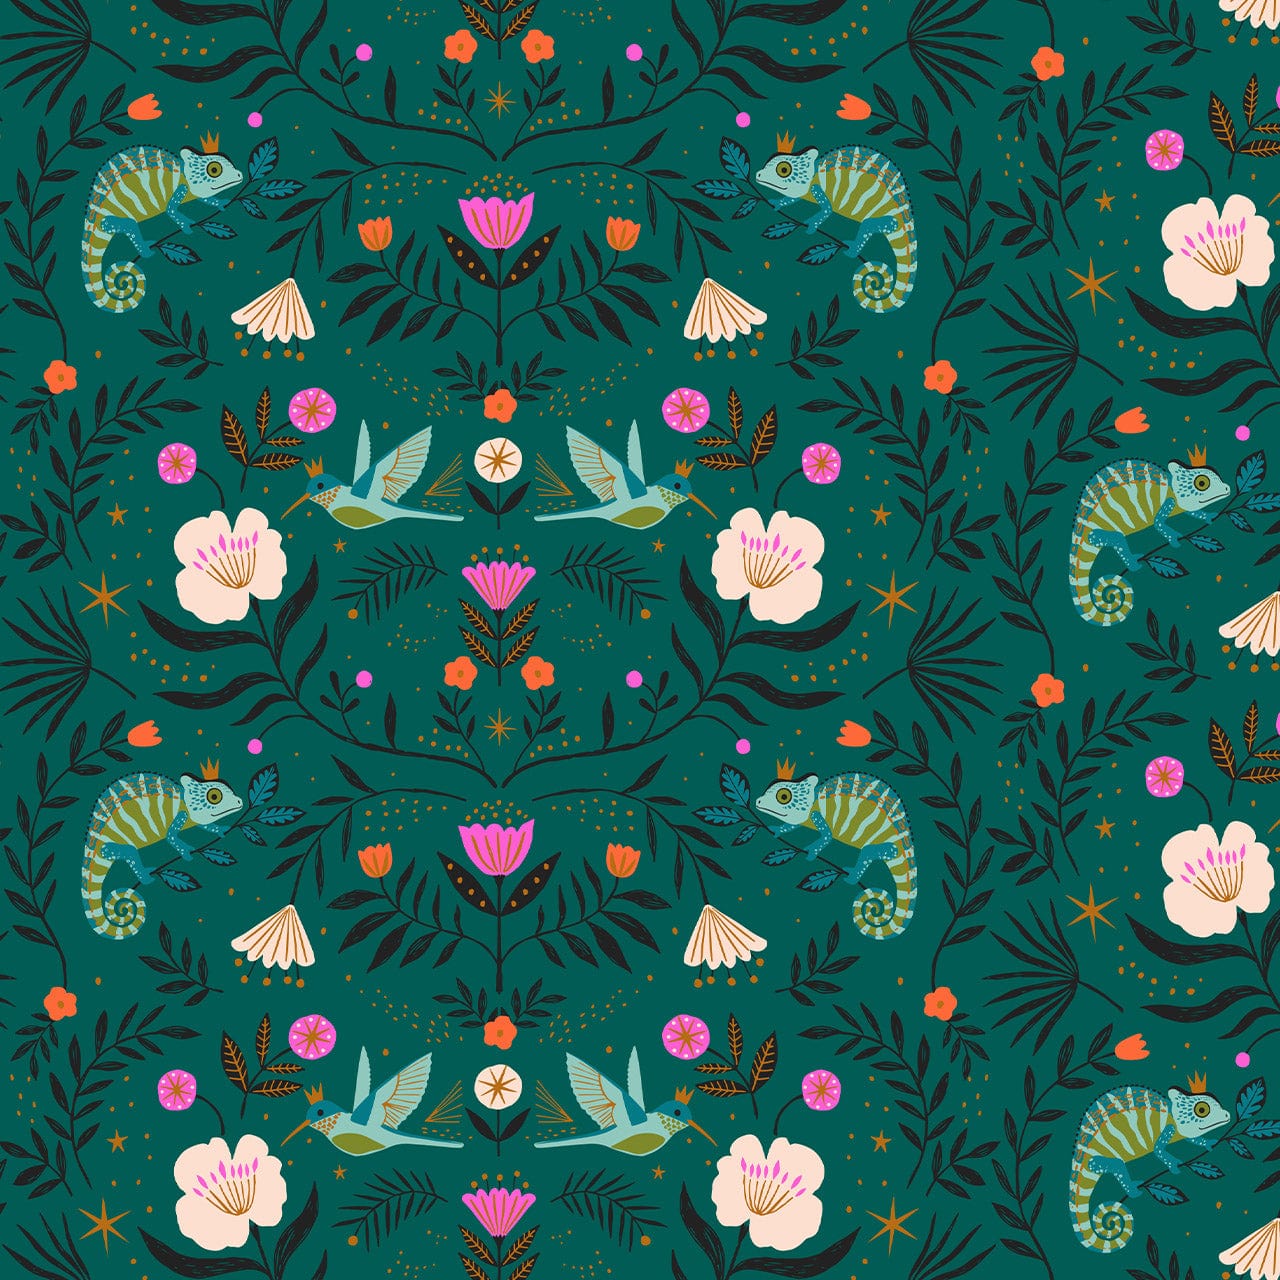 Chameleons and jungle birds on a floral teal cotton fabric - Jungle Luxe by Dashwood Studio